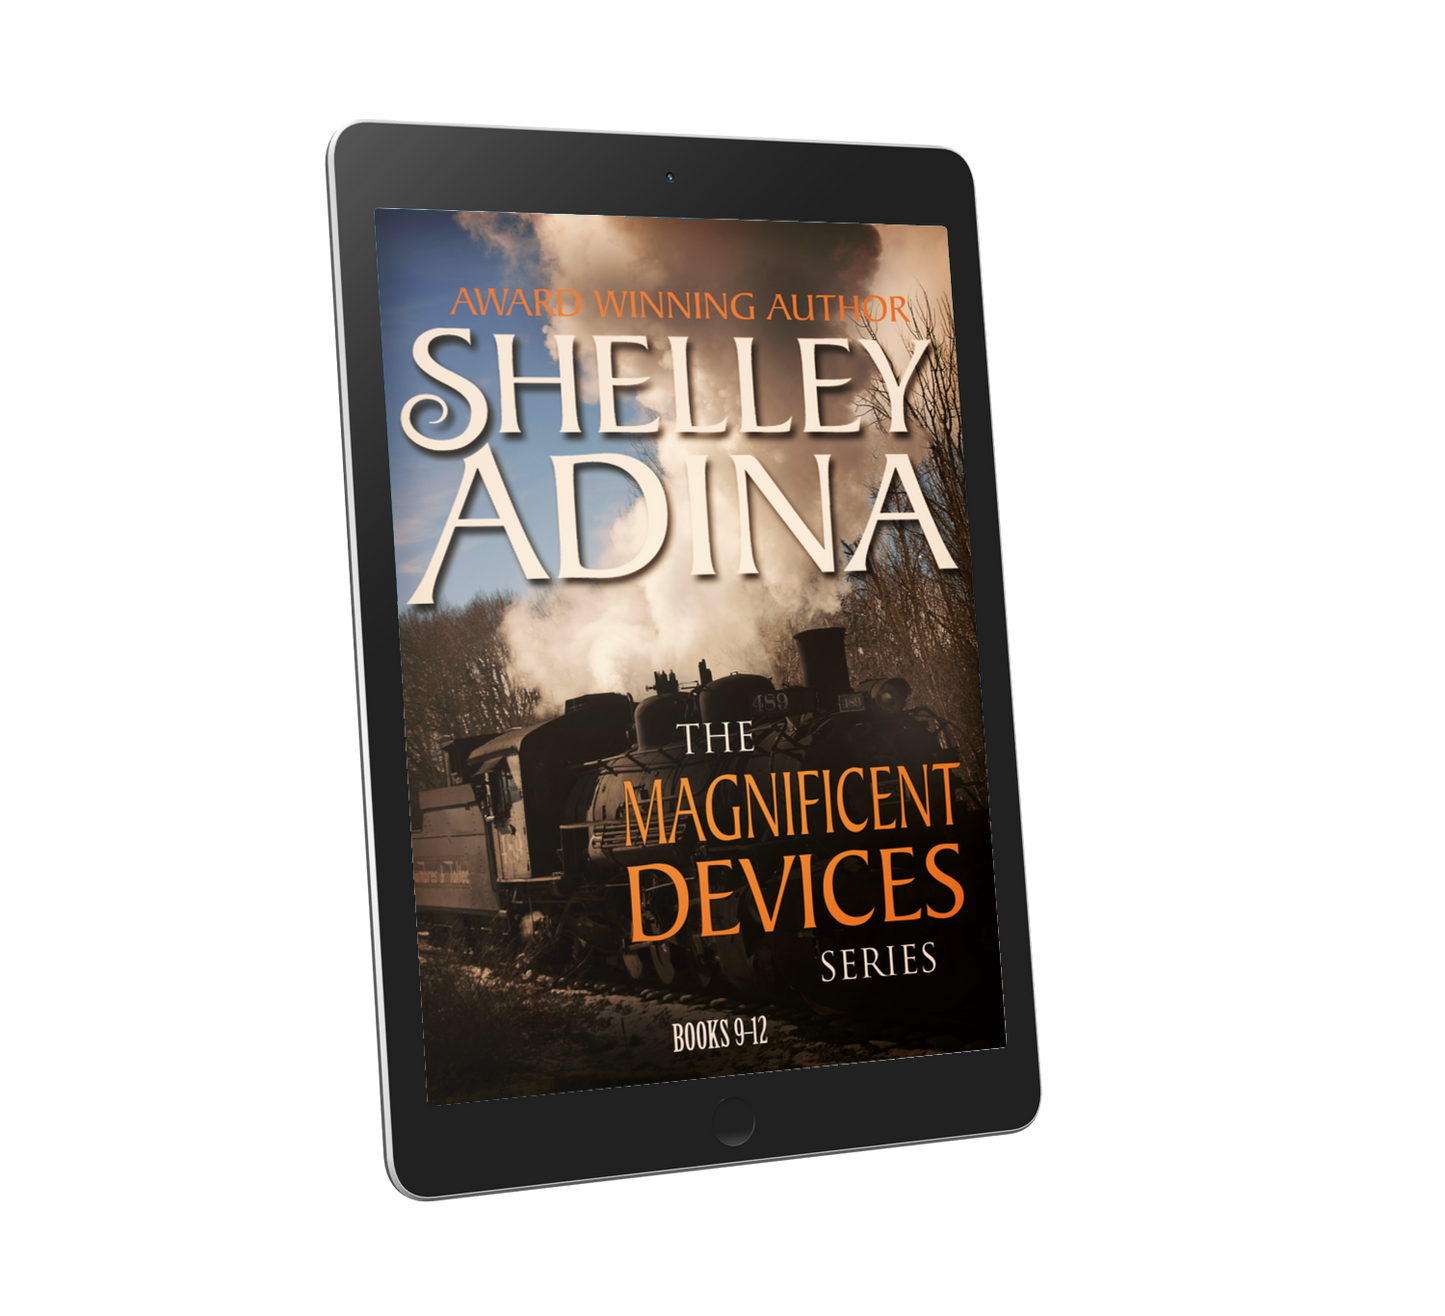 Magnificent Devices books 9-12 box set by Shelley Adina